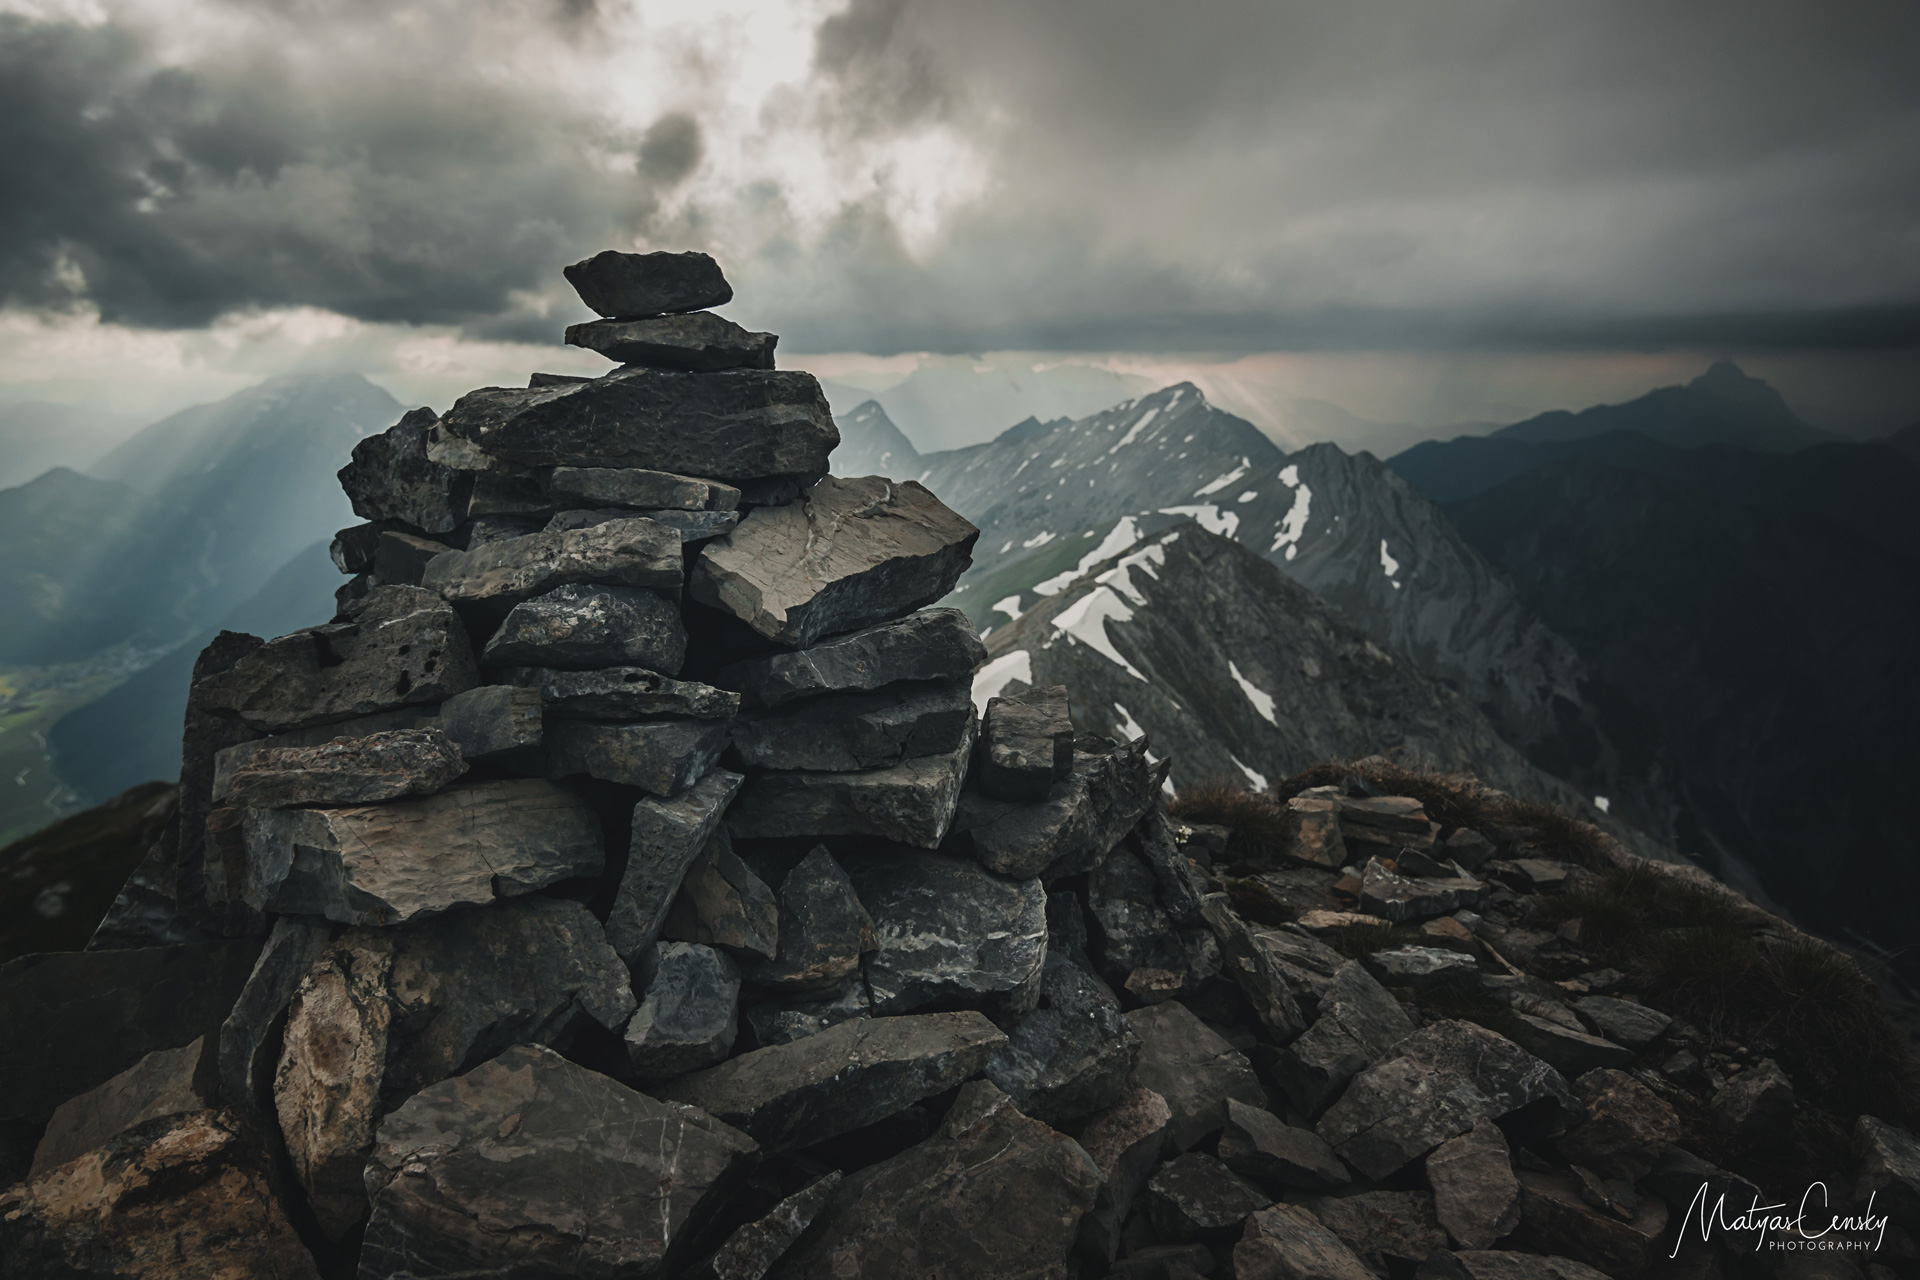 Photo of the very top of Ups Spitze in Austria with cloudy sunset in the background.